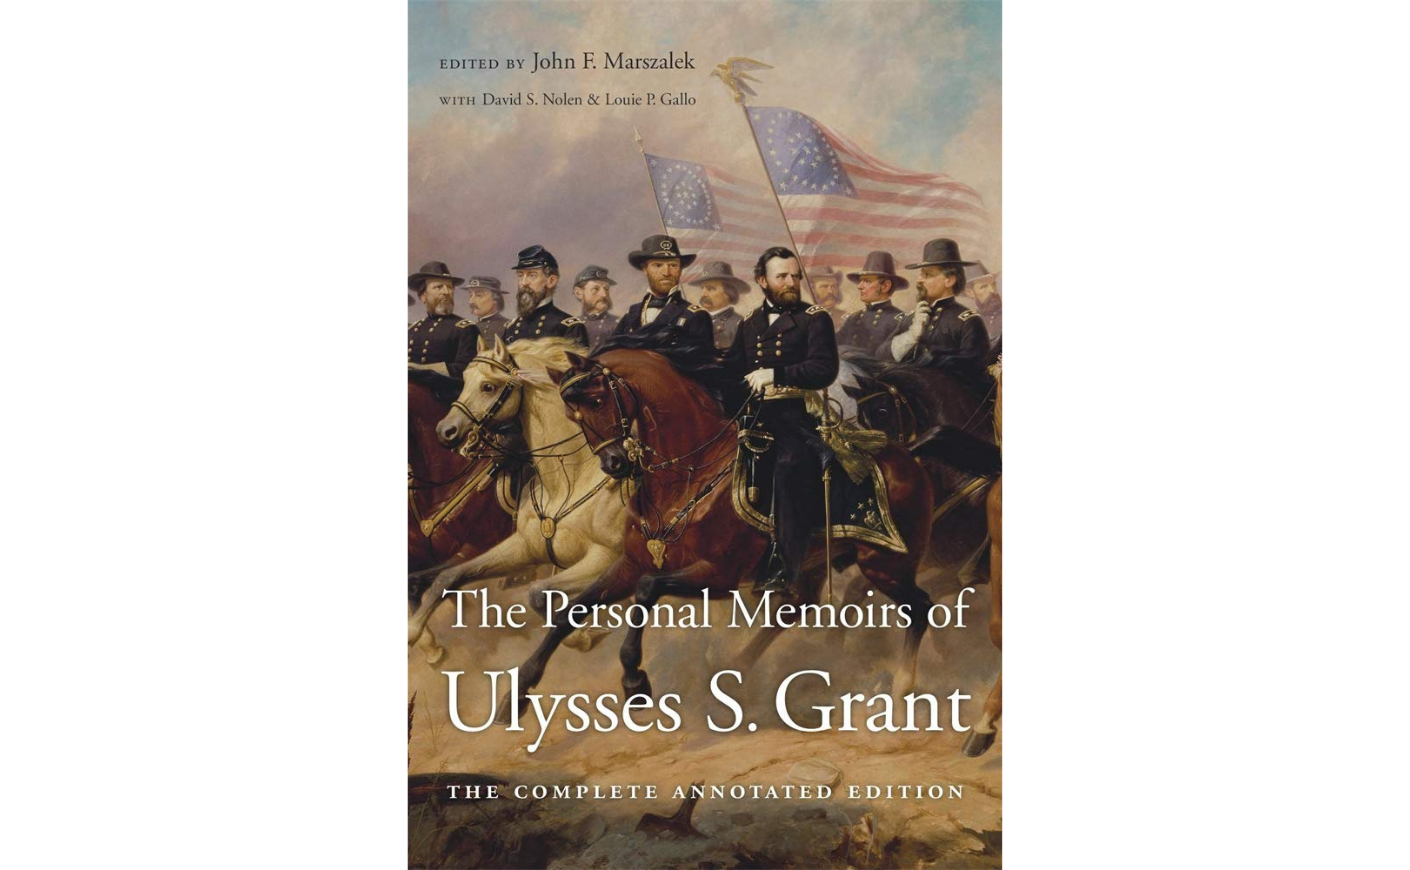 'The Personal Memoirs of Ulysses S. Grant'